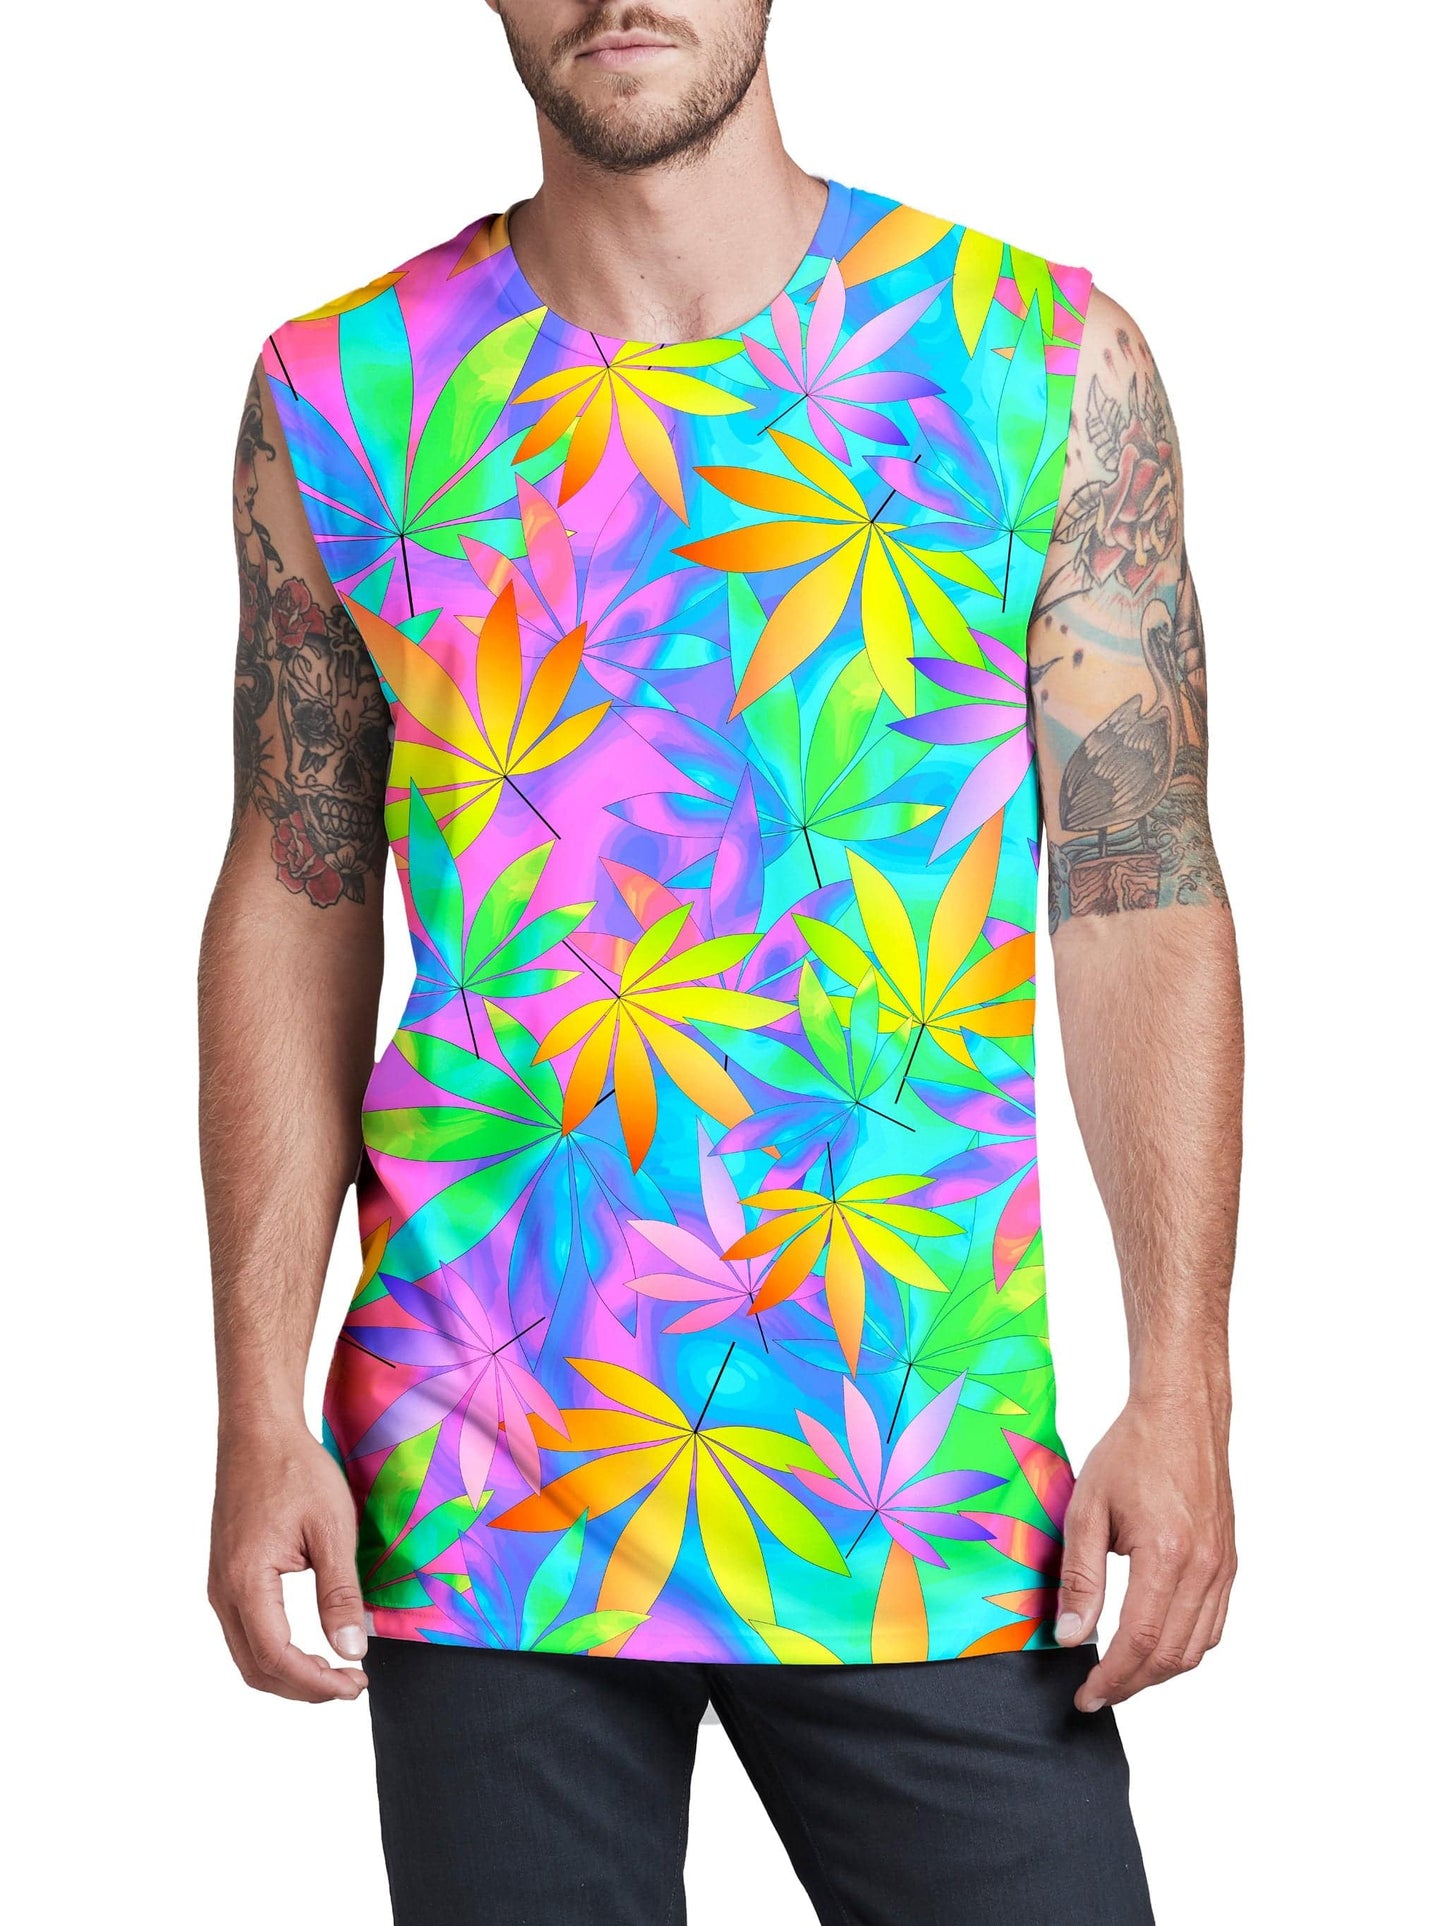 Take a Little Trip with Weed Men's Muscle Tank, Sartoris Art, | iEDM